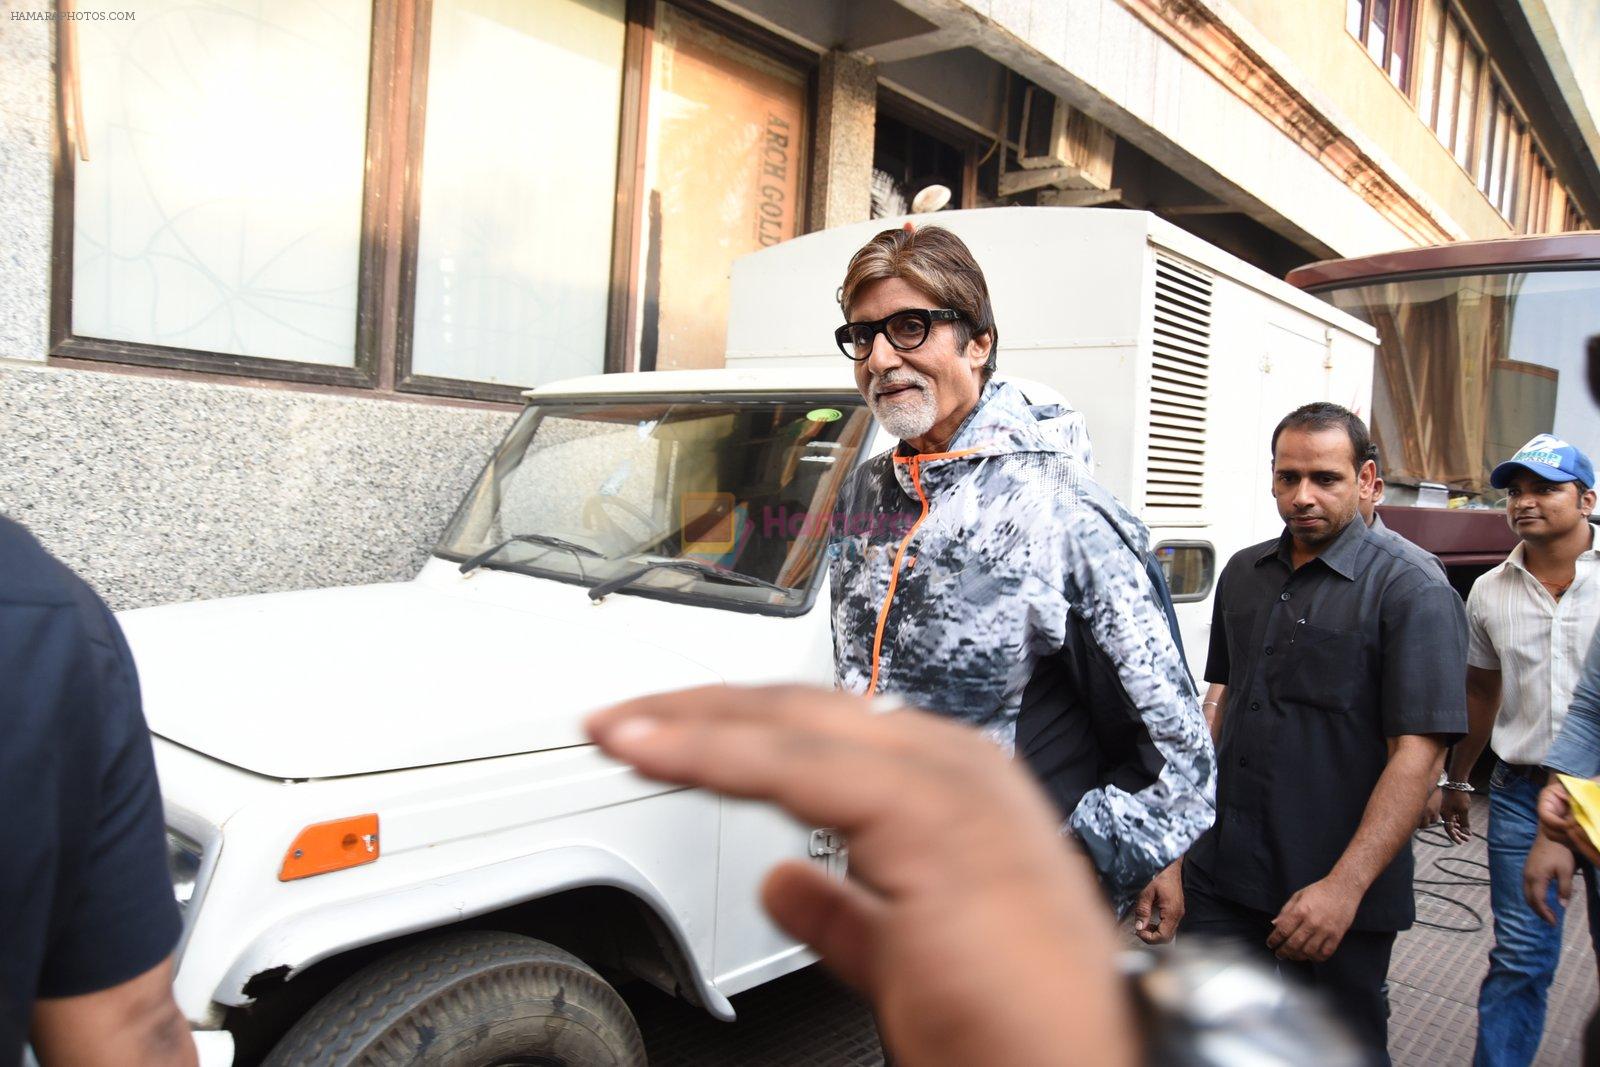 Amitabh Bachchan at Piku first look launch in Mumbai on 25th March 2015